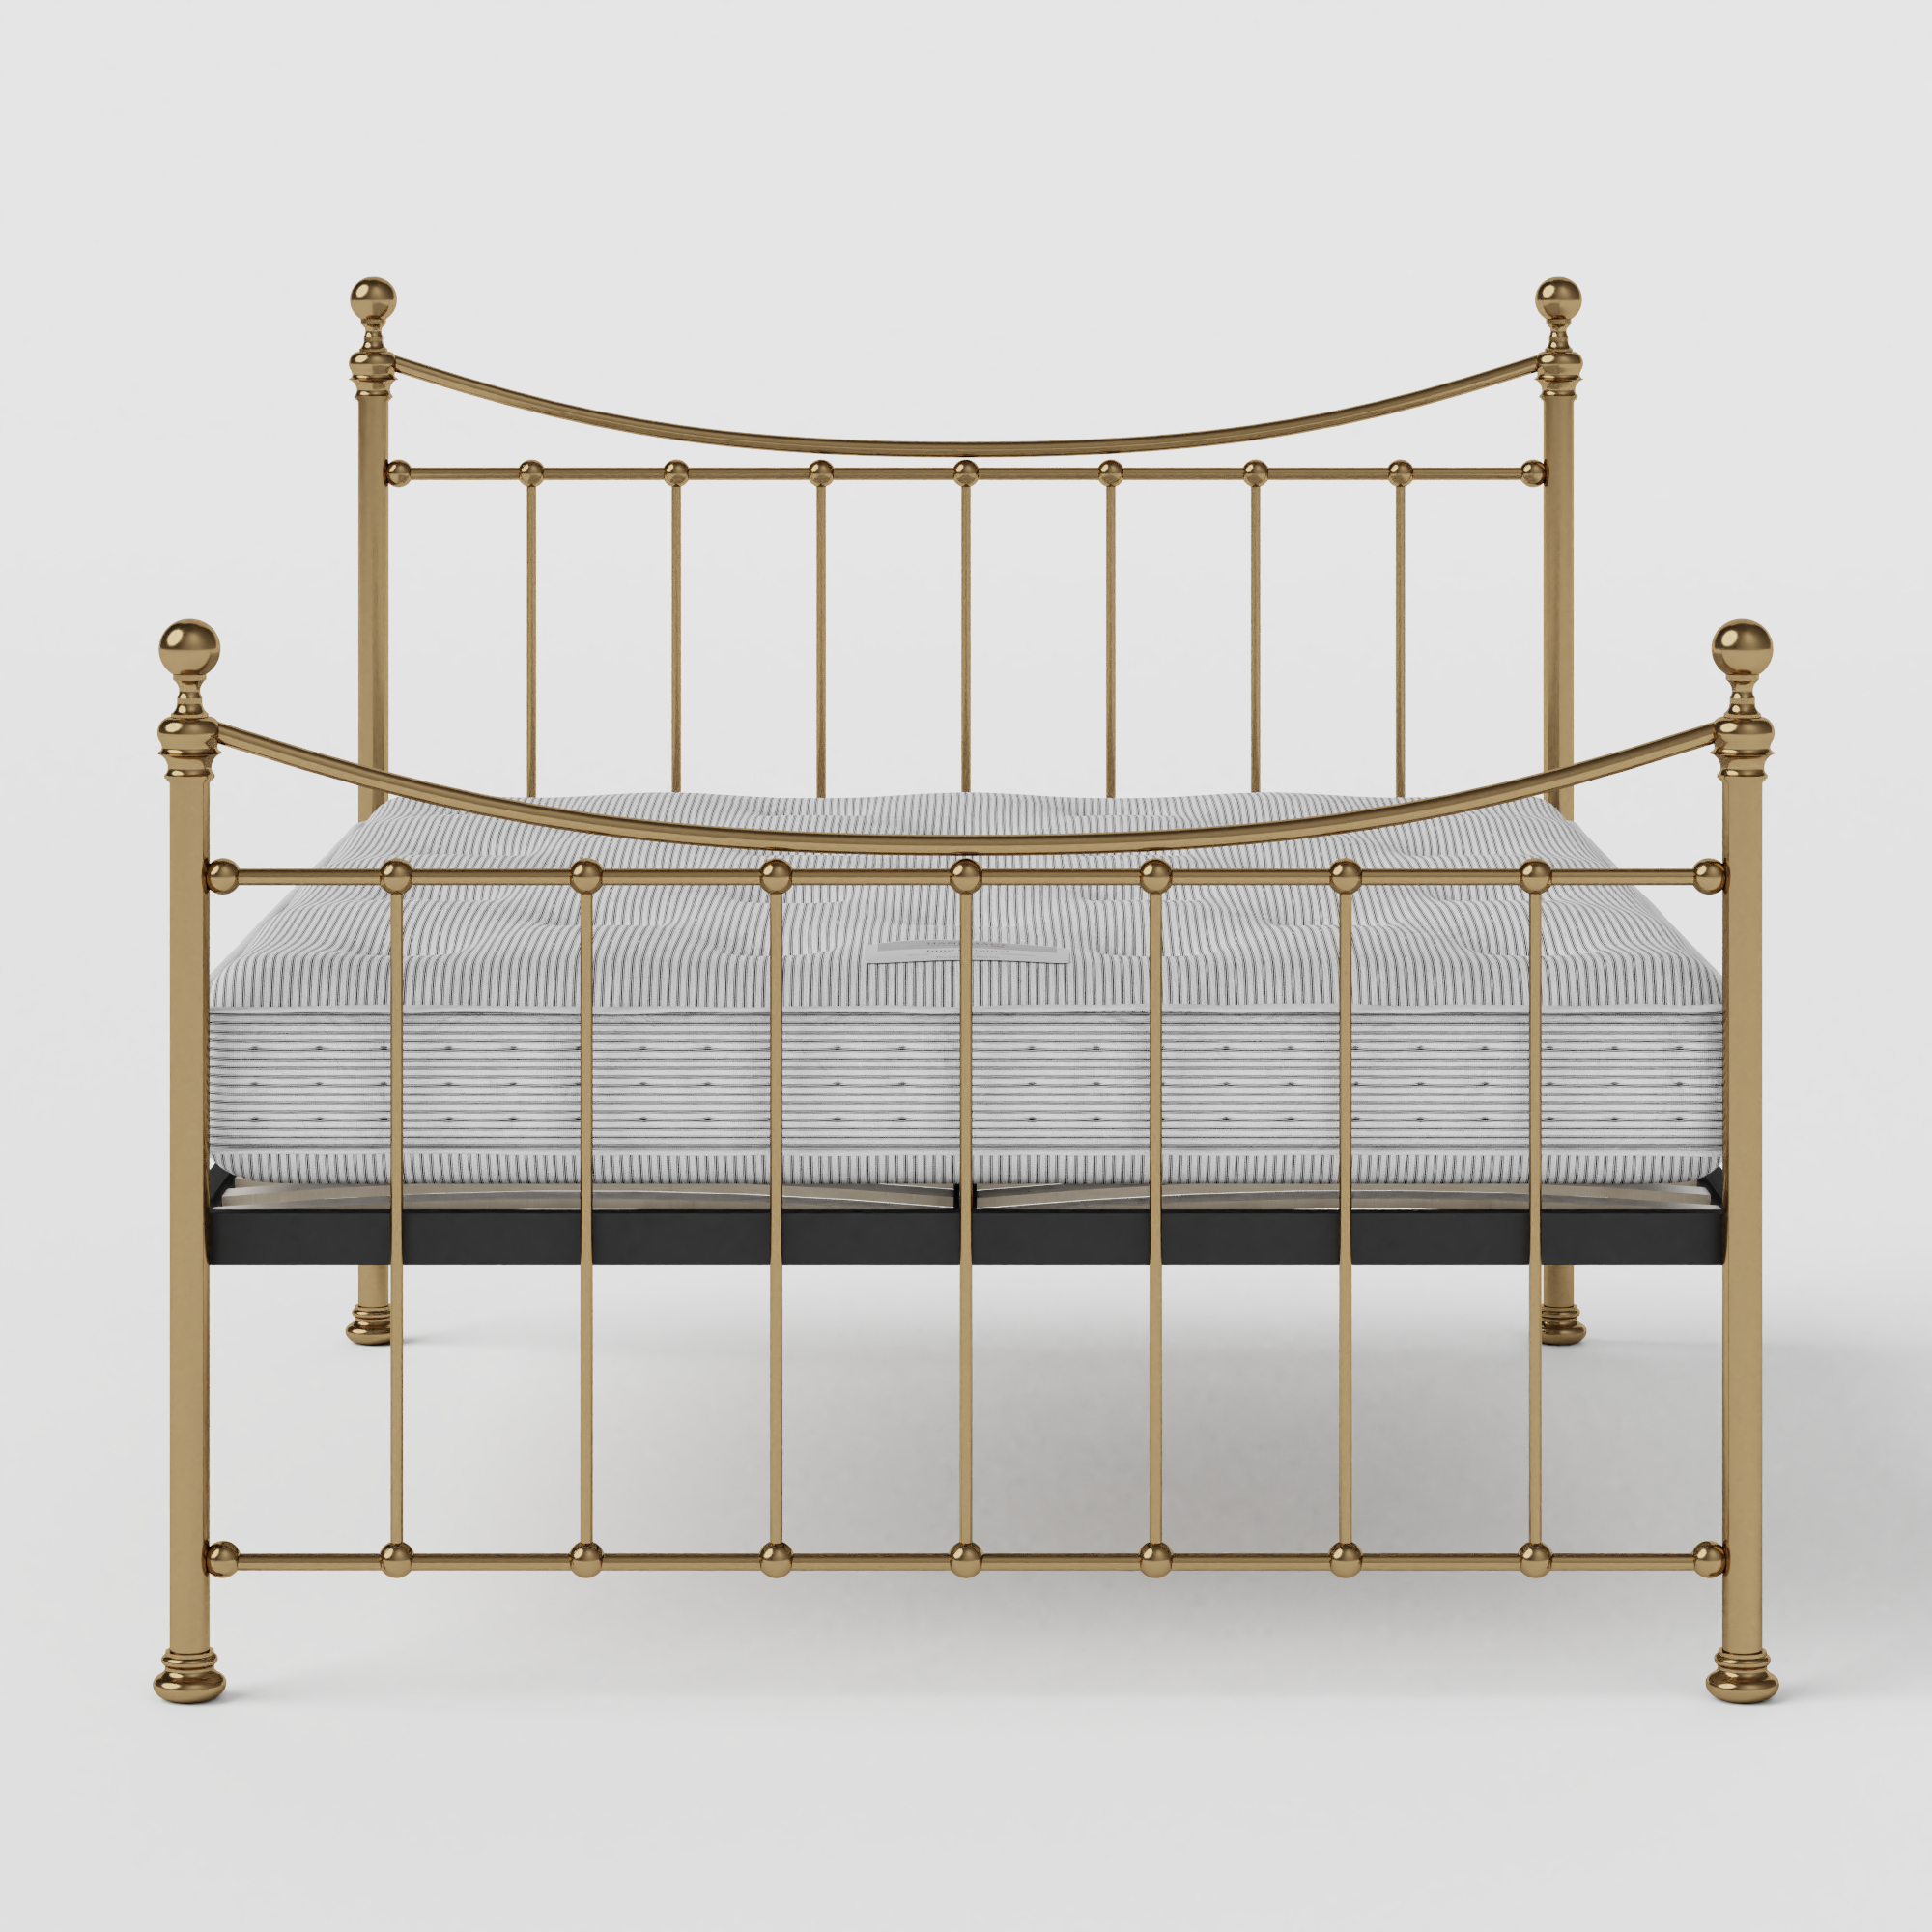 Kendal brass bed with Juno mattress